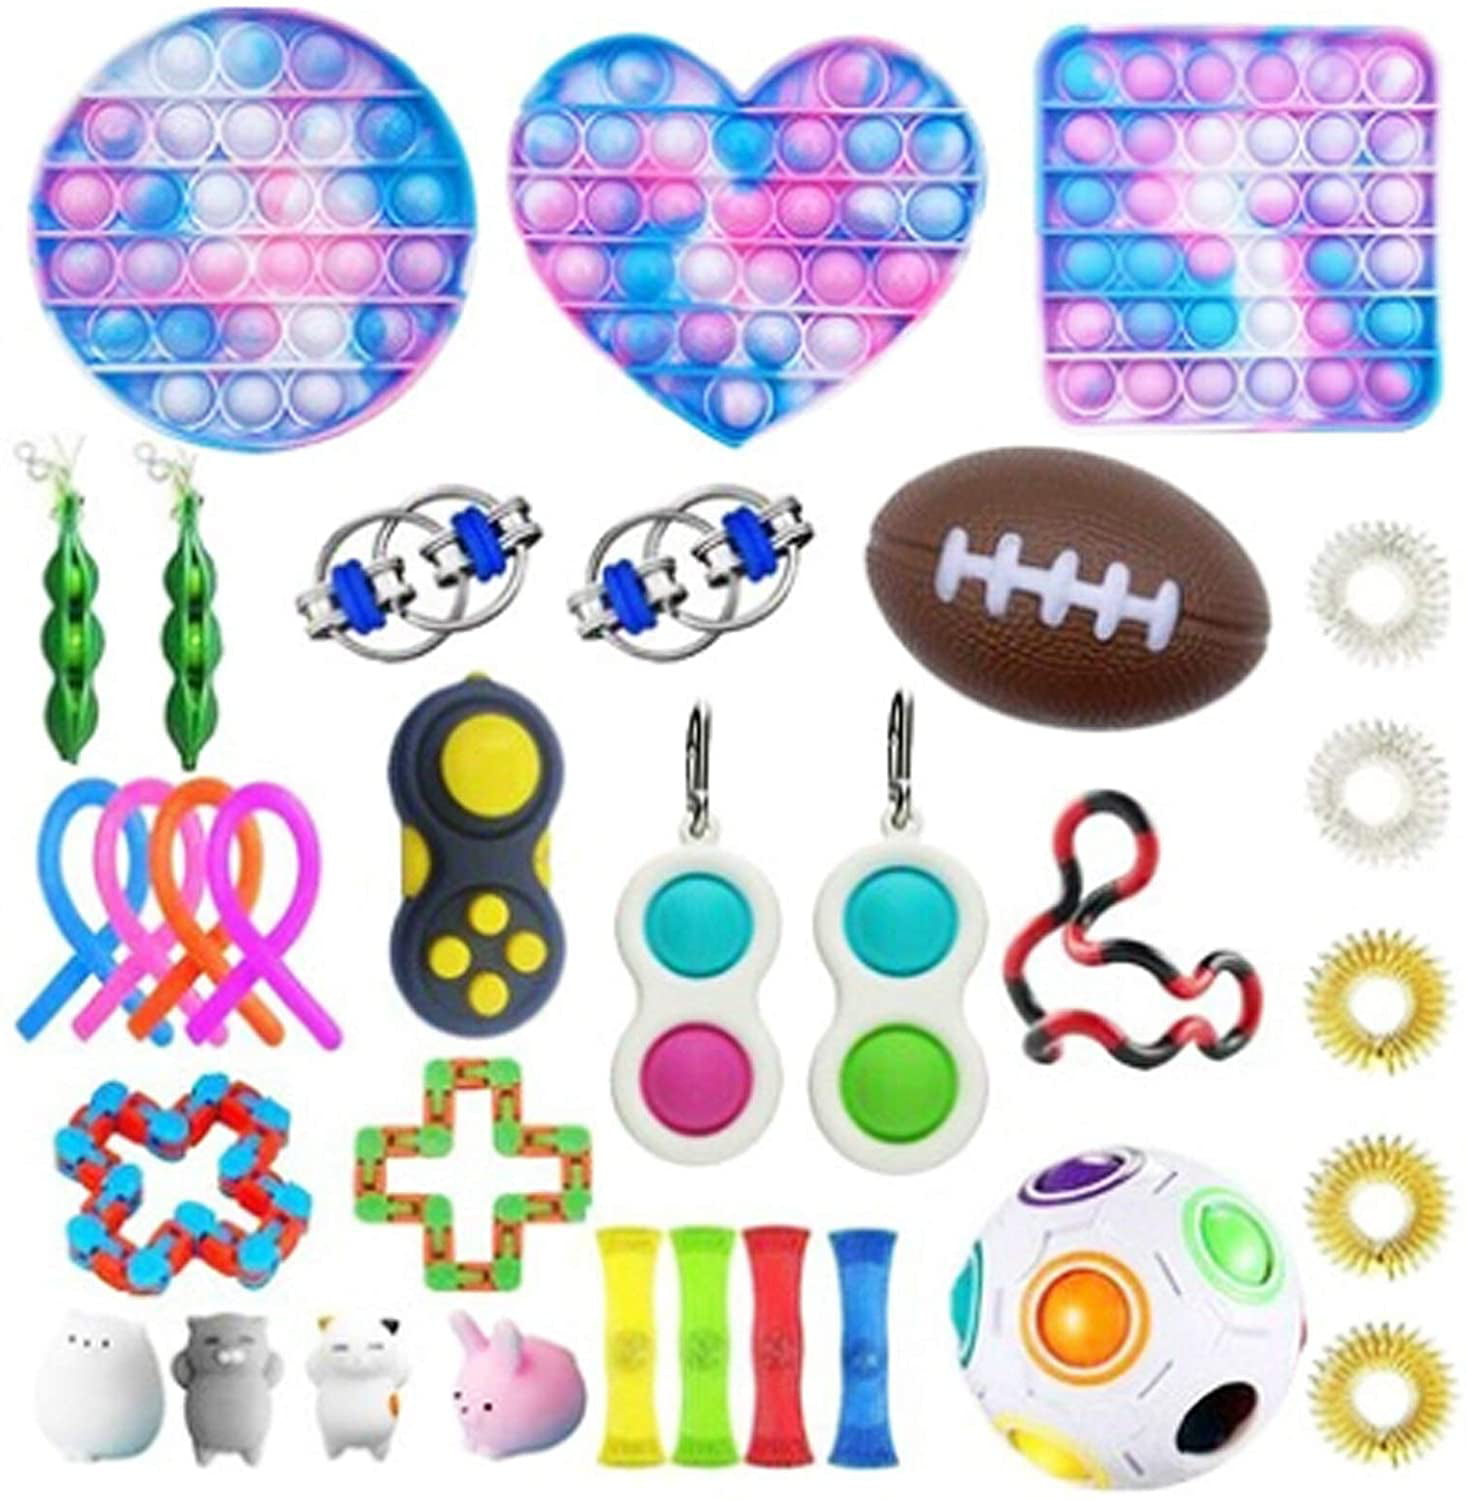 Details about   Fidget Sensory Toys Set 20 Pack For Stress Relief Hot Anti-Anxiety Stocking T7O4 